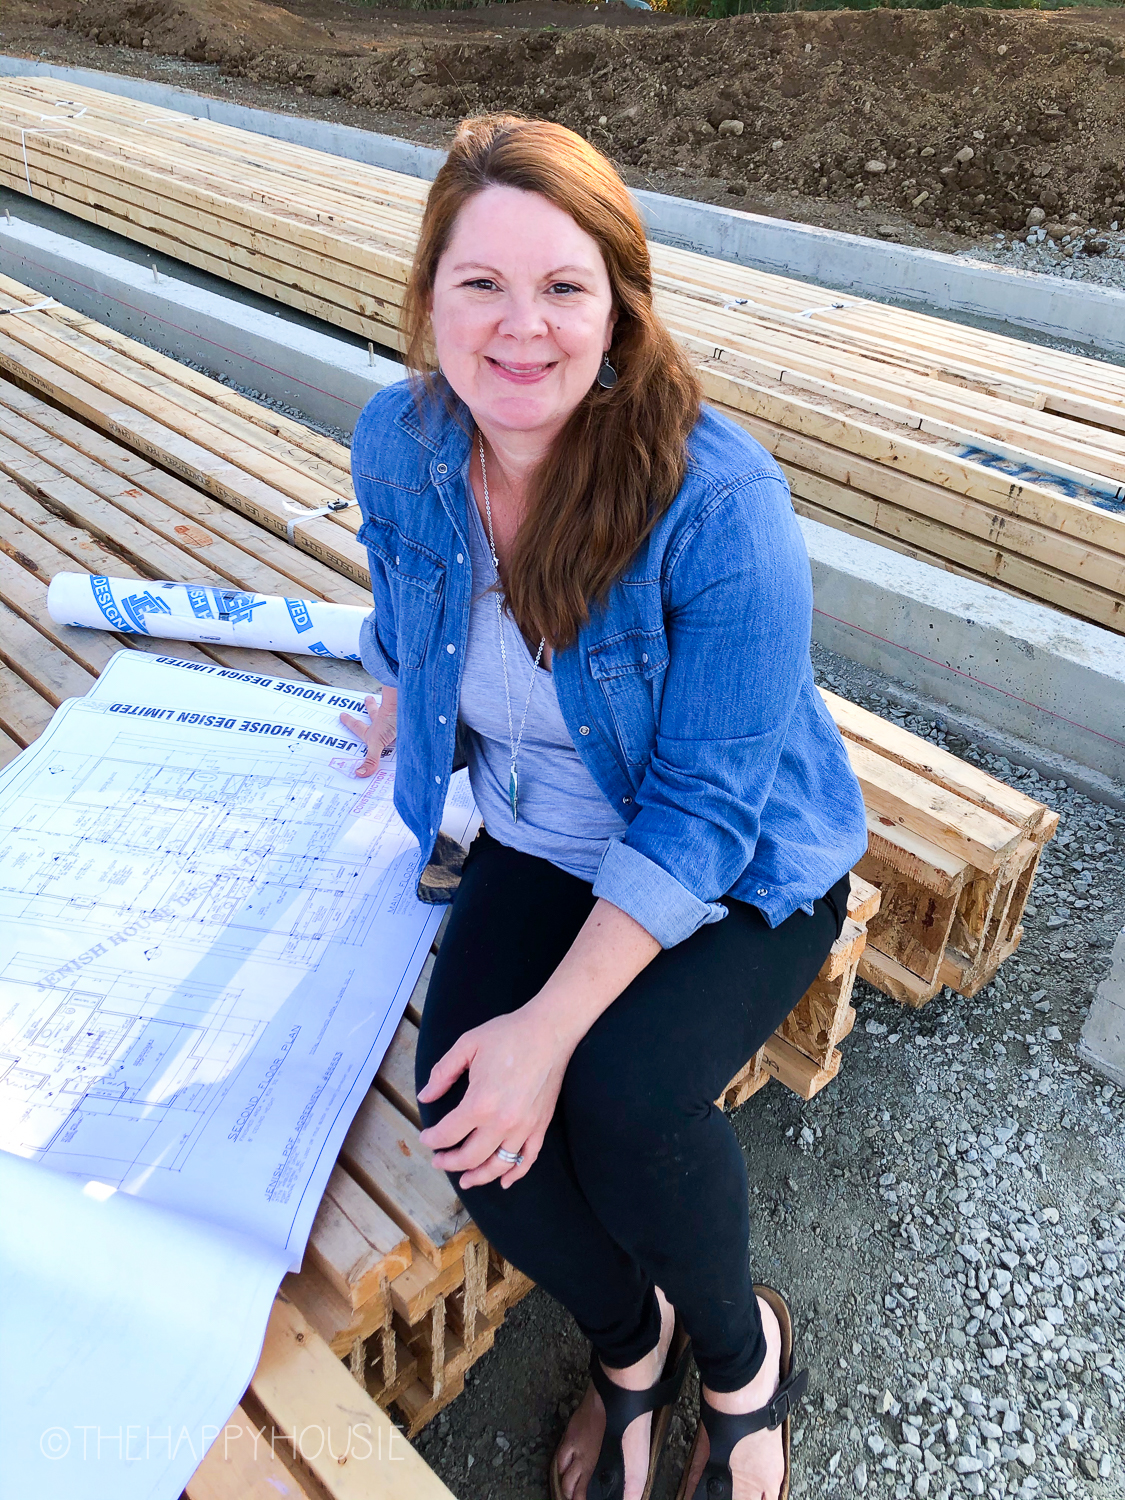 woman at building site with house plans